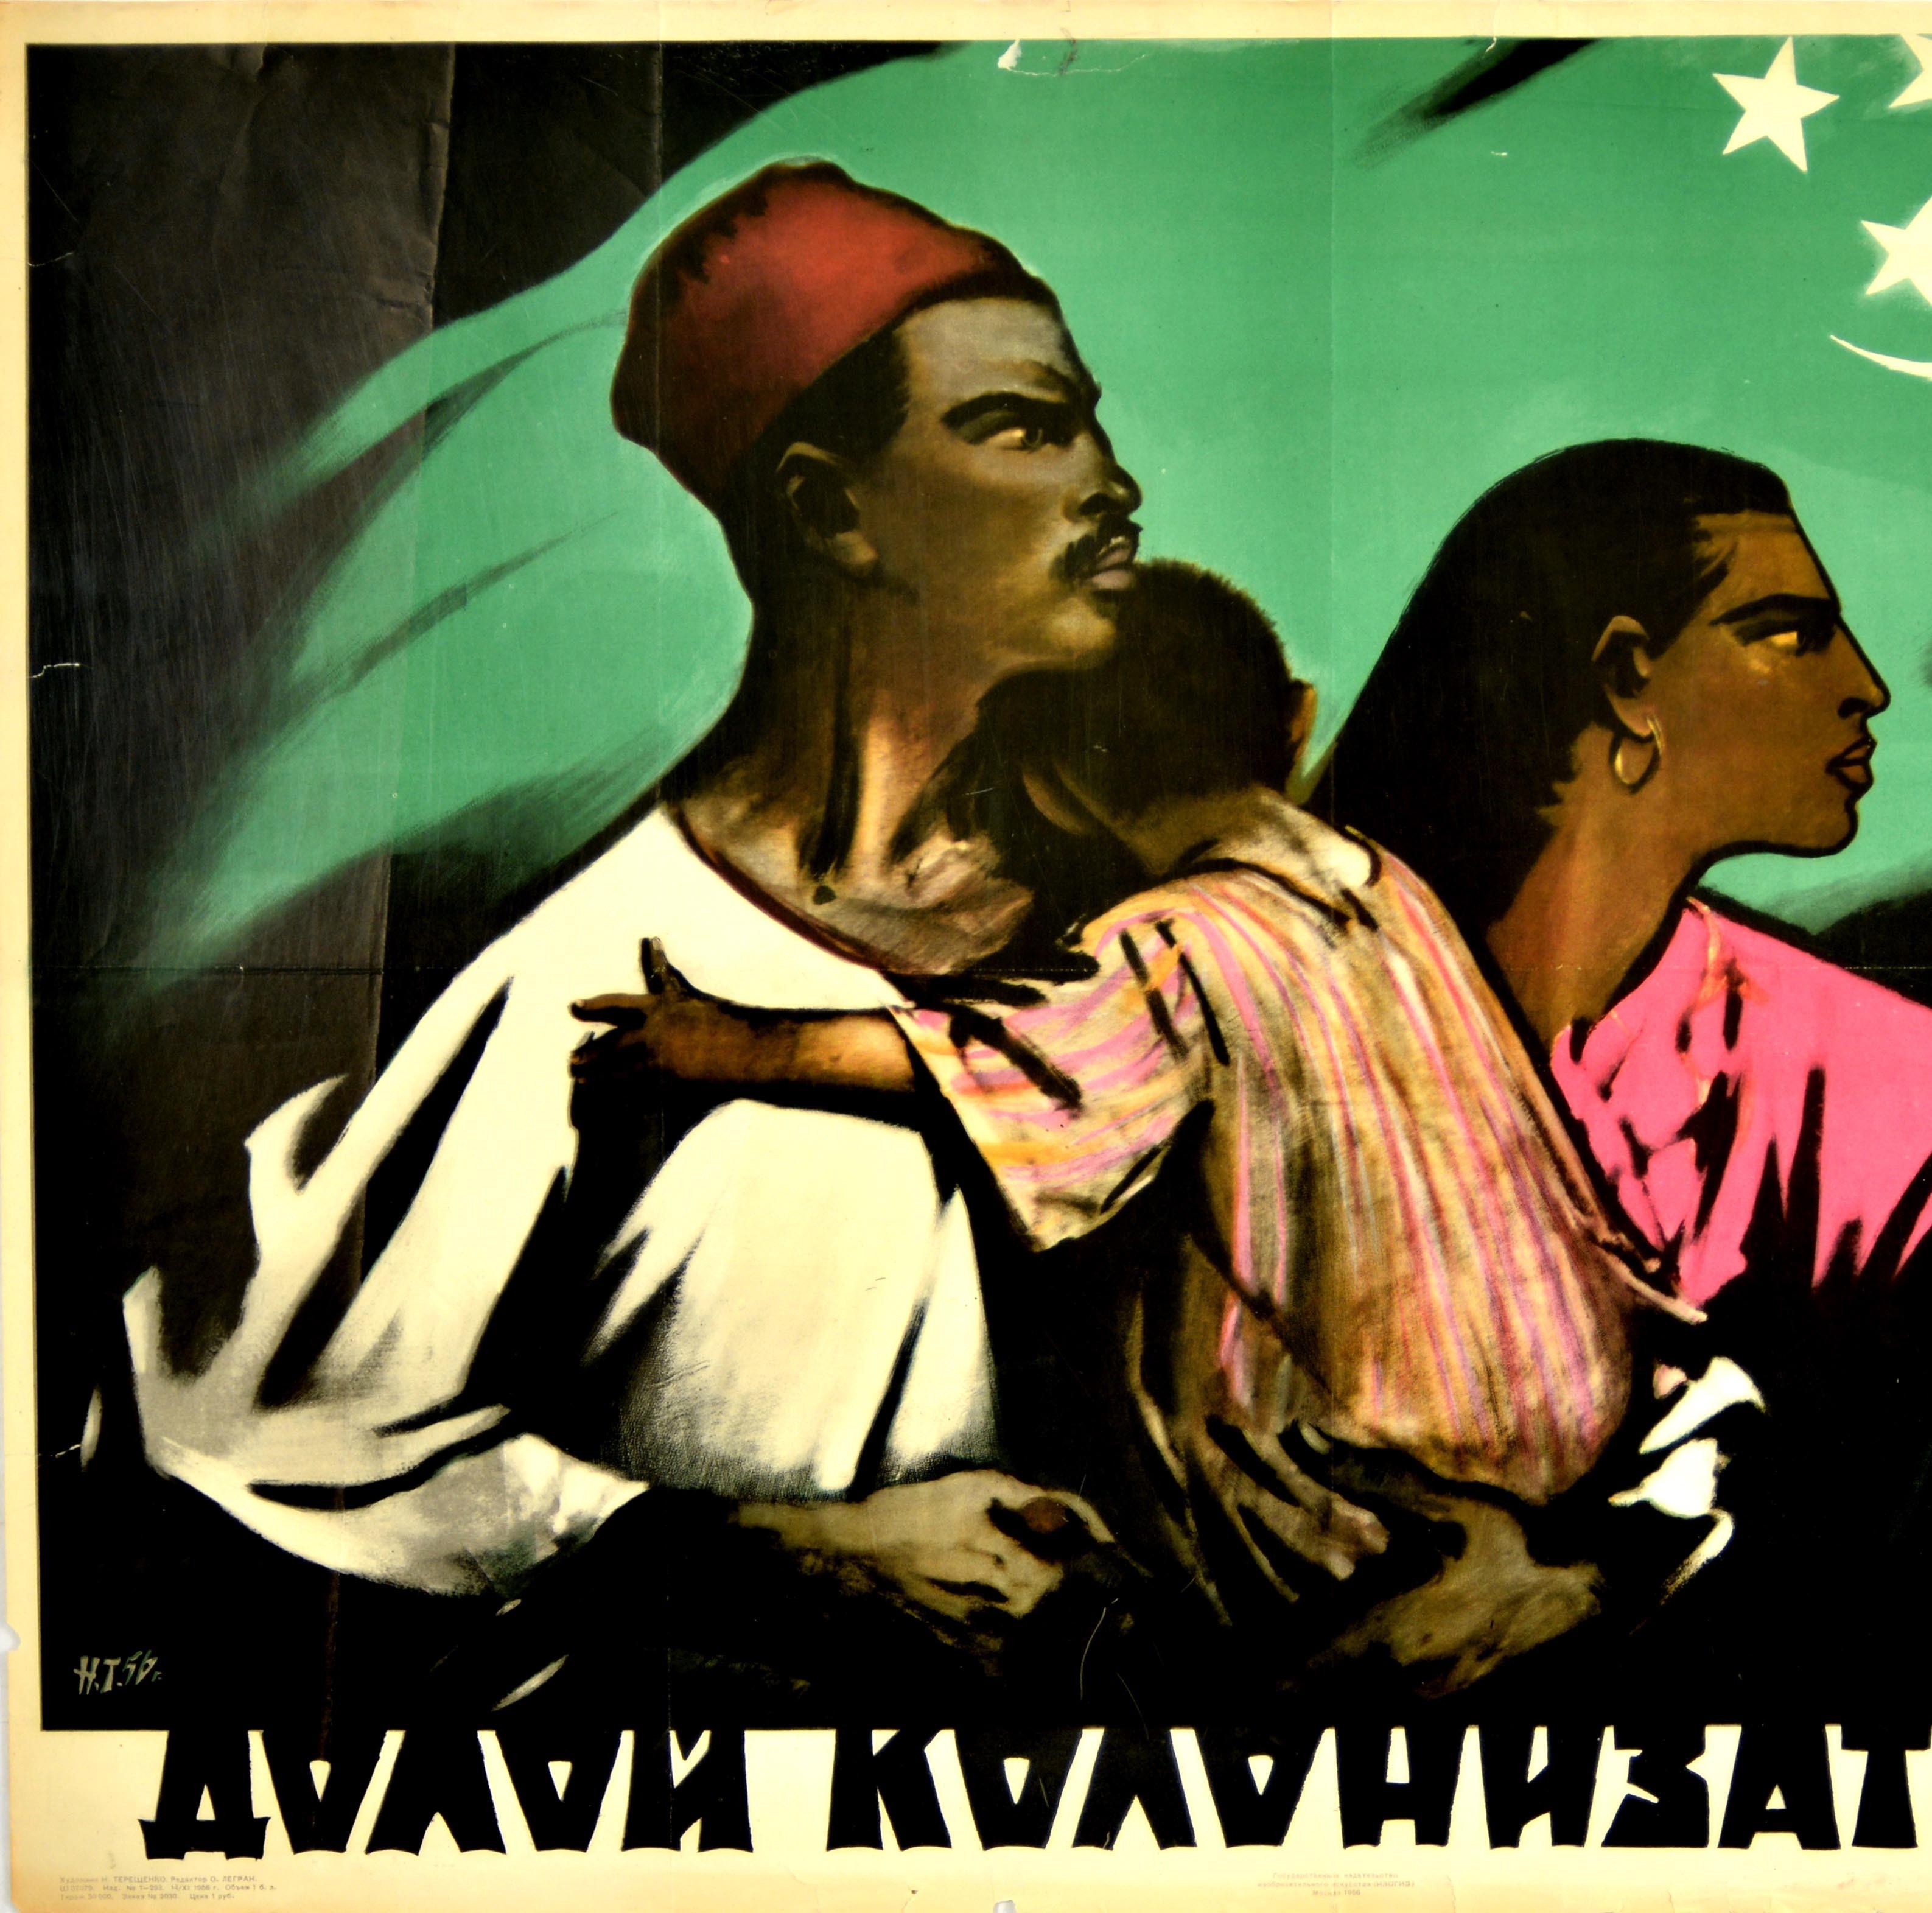 Original vintage Soviet propaganda poster - Down With The Colonisers - featuring a dynamic design of a family striding forward with the father holding a young child and the mother holding a large green flag with a white crescent moon and three stars